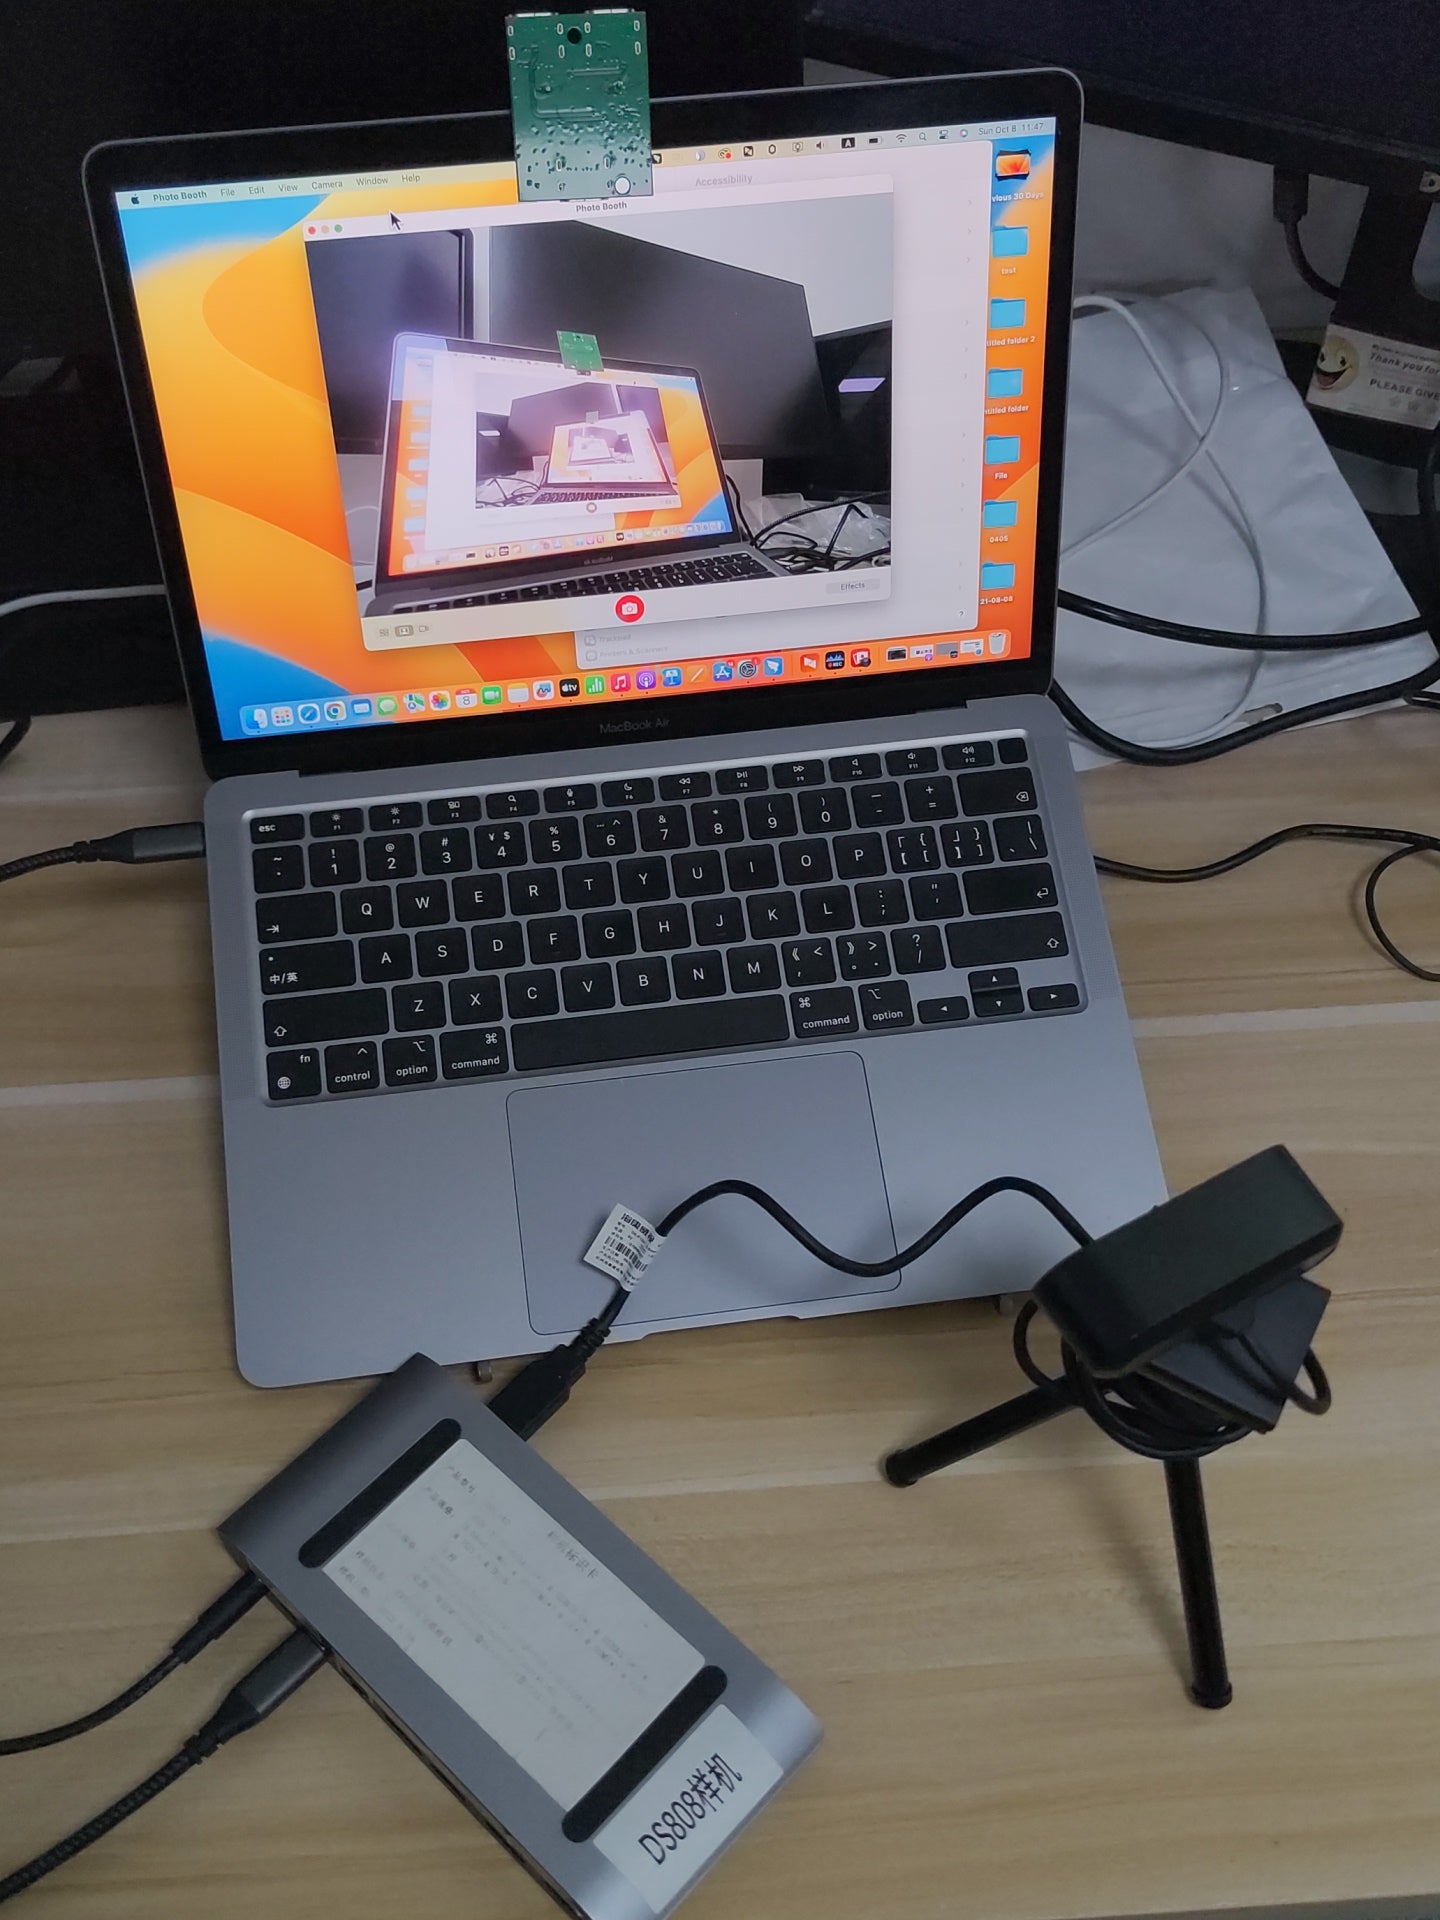 When I connect the streaming camera/webcam to Minisopuru Docking Station, but it doesn't work, how should I solve it?